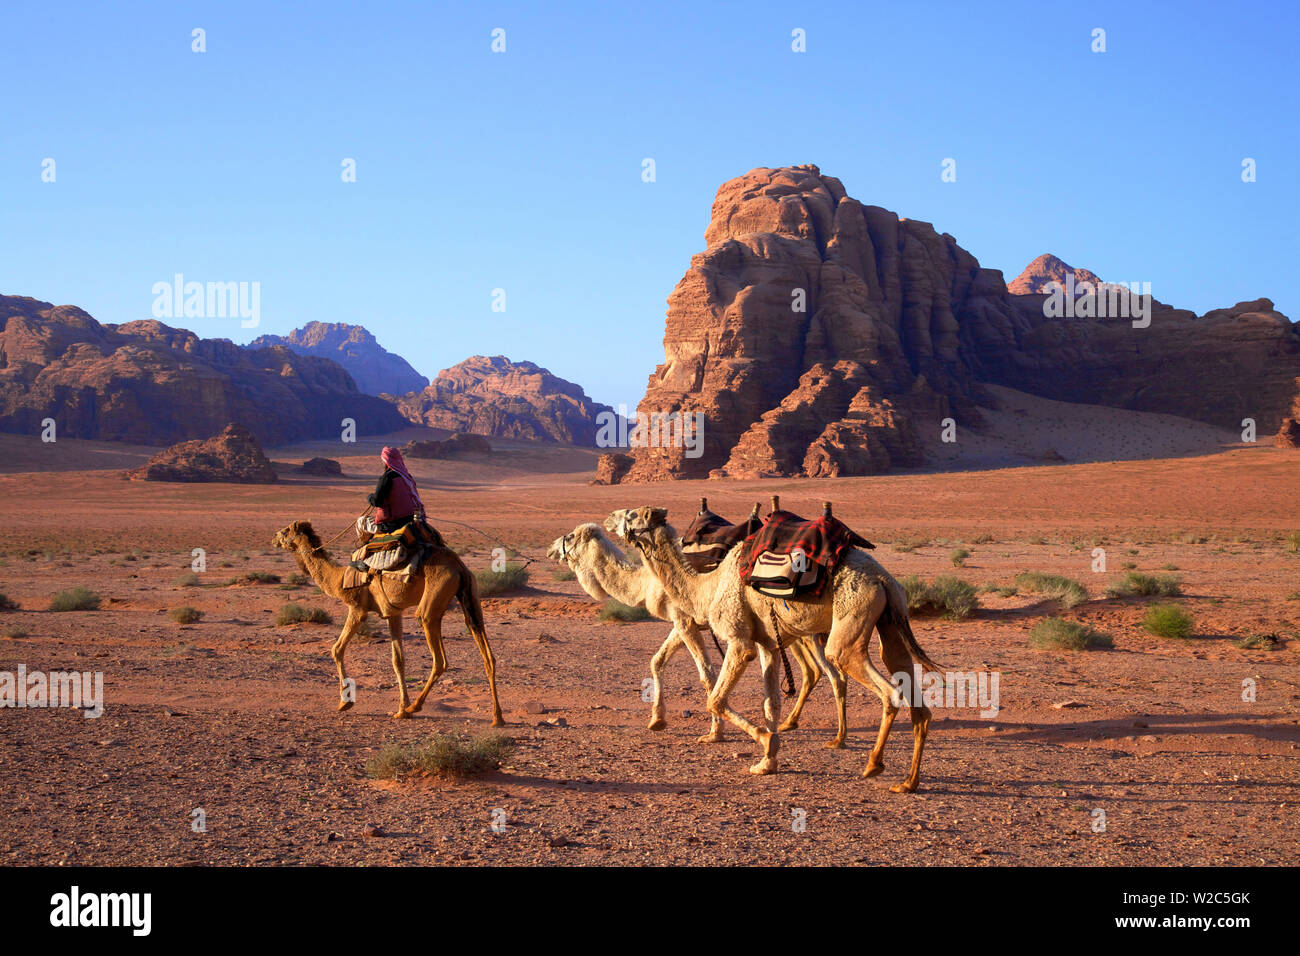 Bedouin With Camels, Wadi Rum, Jordan, Middle East Stock Photo